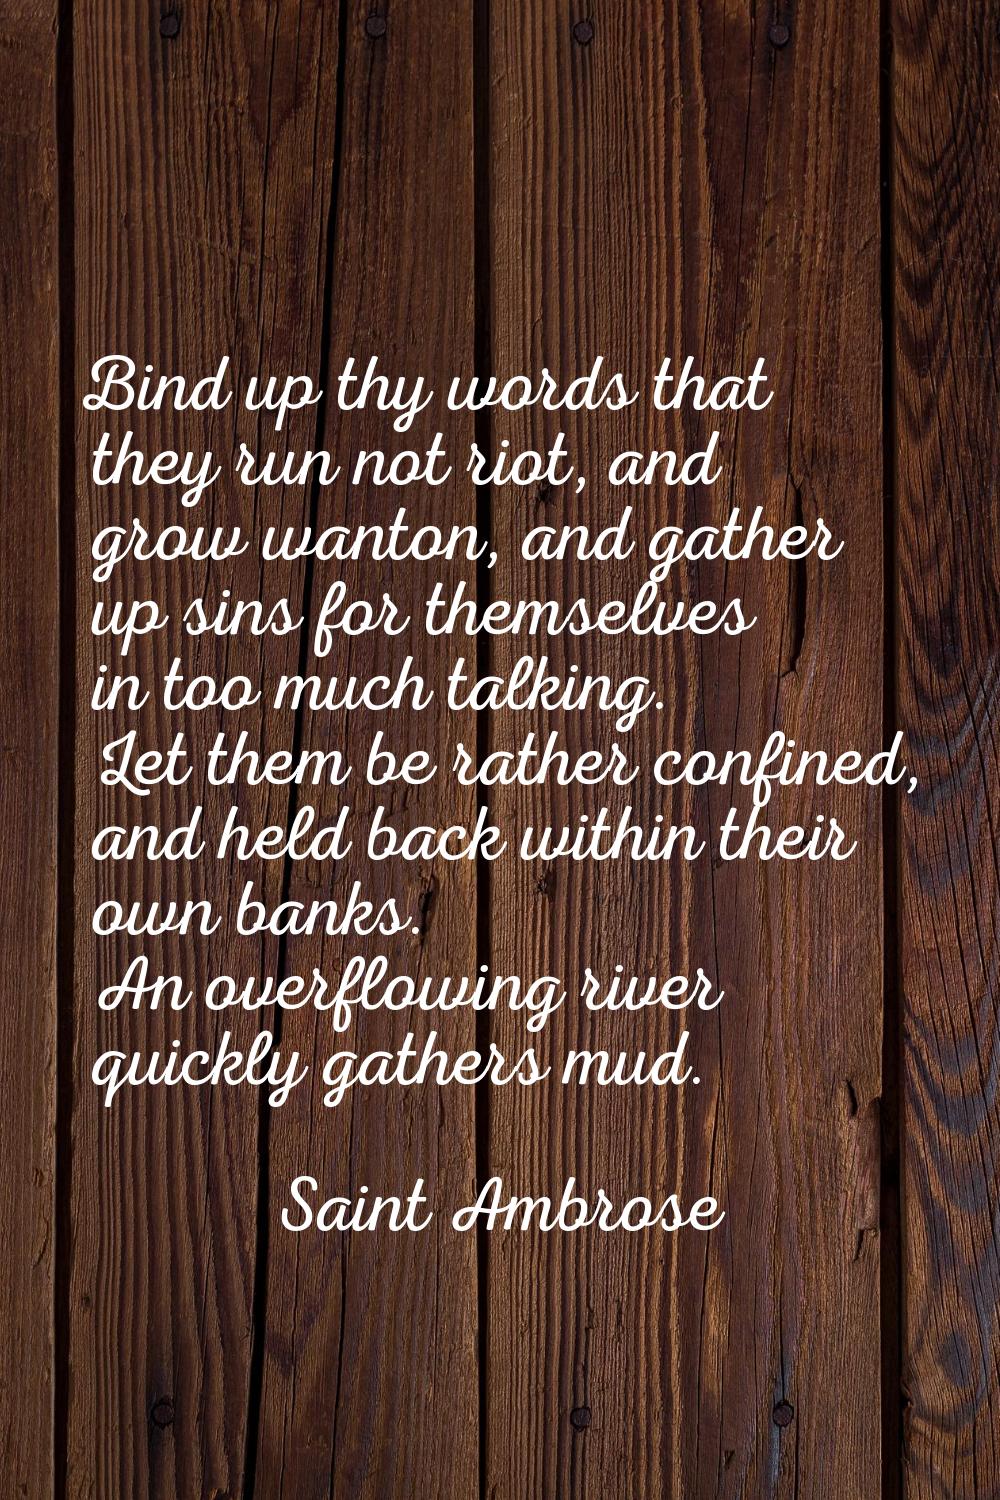 Bind up thy words that they run not riot, and grow wanton, and gather up sins for themselves in too